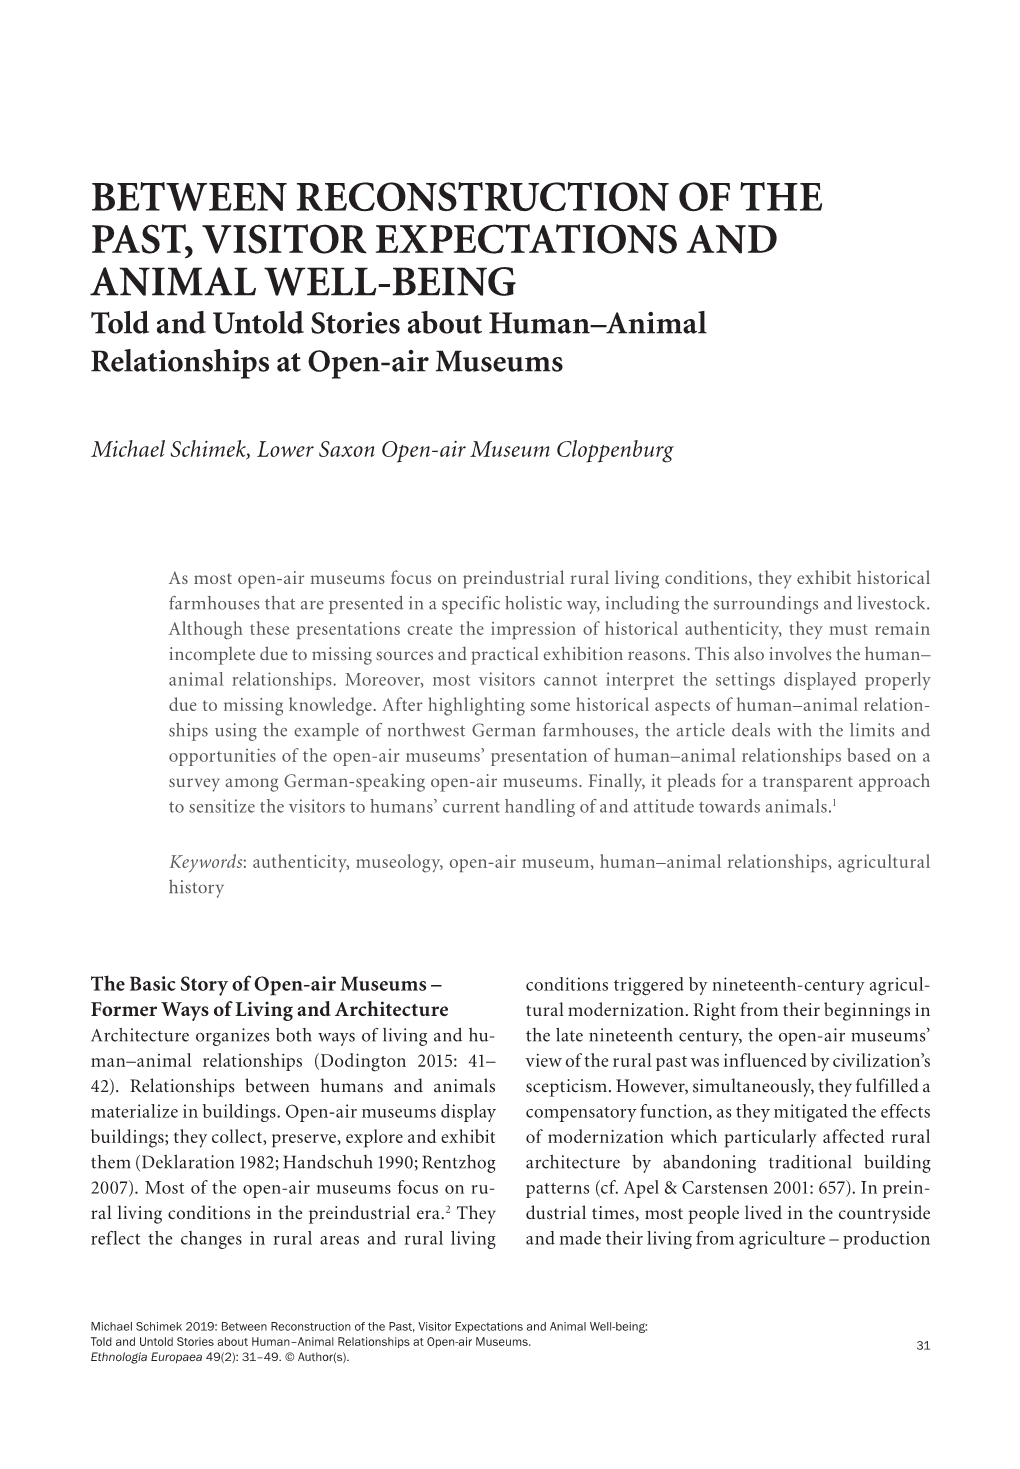 Between Reconstruction of the Past, Visitor Expectations and Animal Well-Being: Told and Untold Stories About Human–Animal Relationships at Open-Air Museums